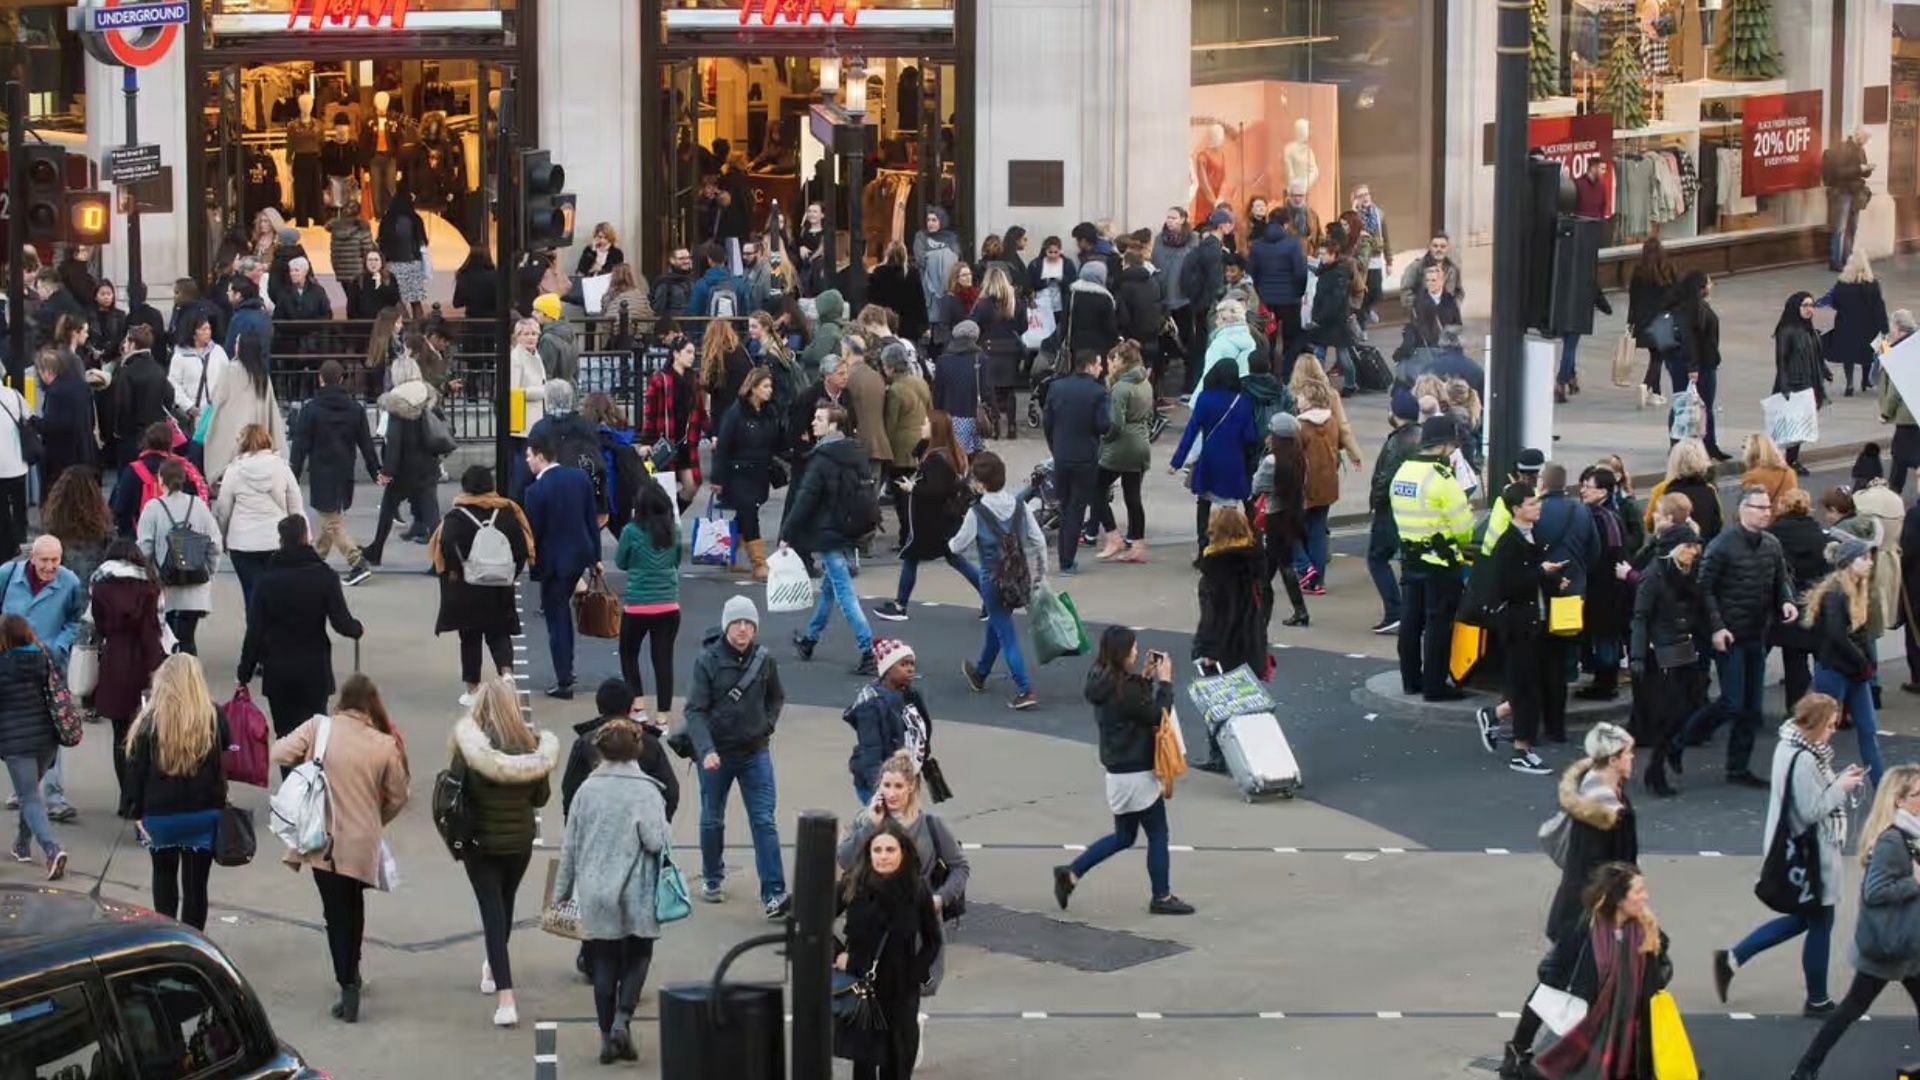 PM blasts 'unacceptable' social media craze that led to Oxford Street  looting